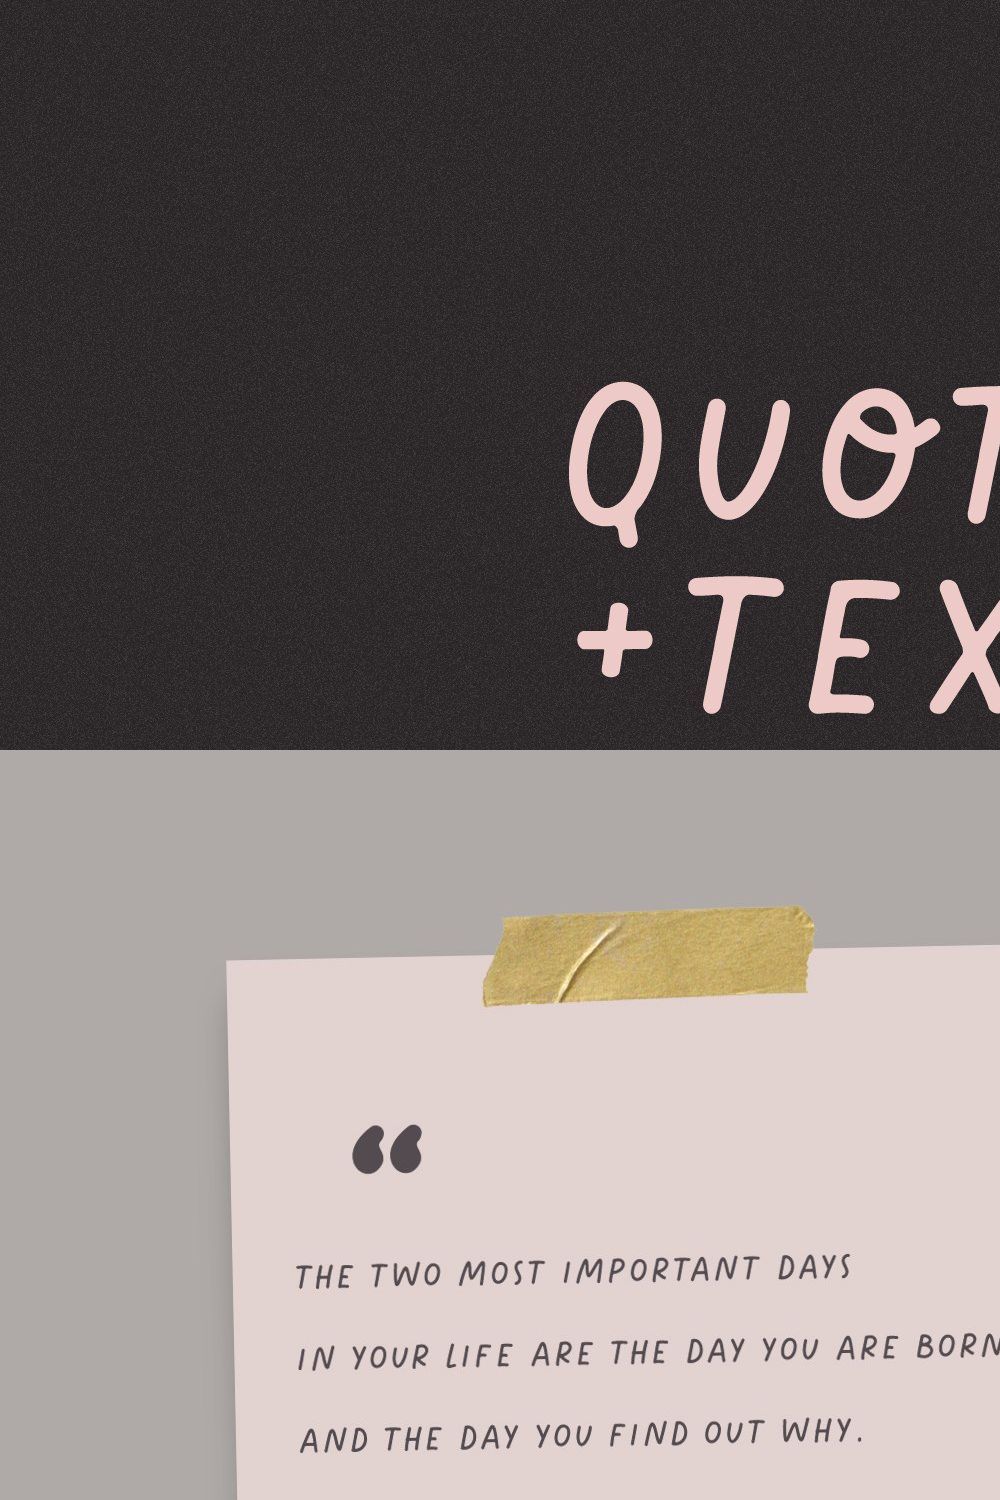 Quotes and Texts Font pinterest preview image.